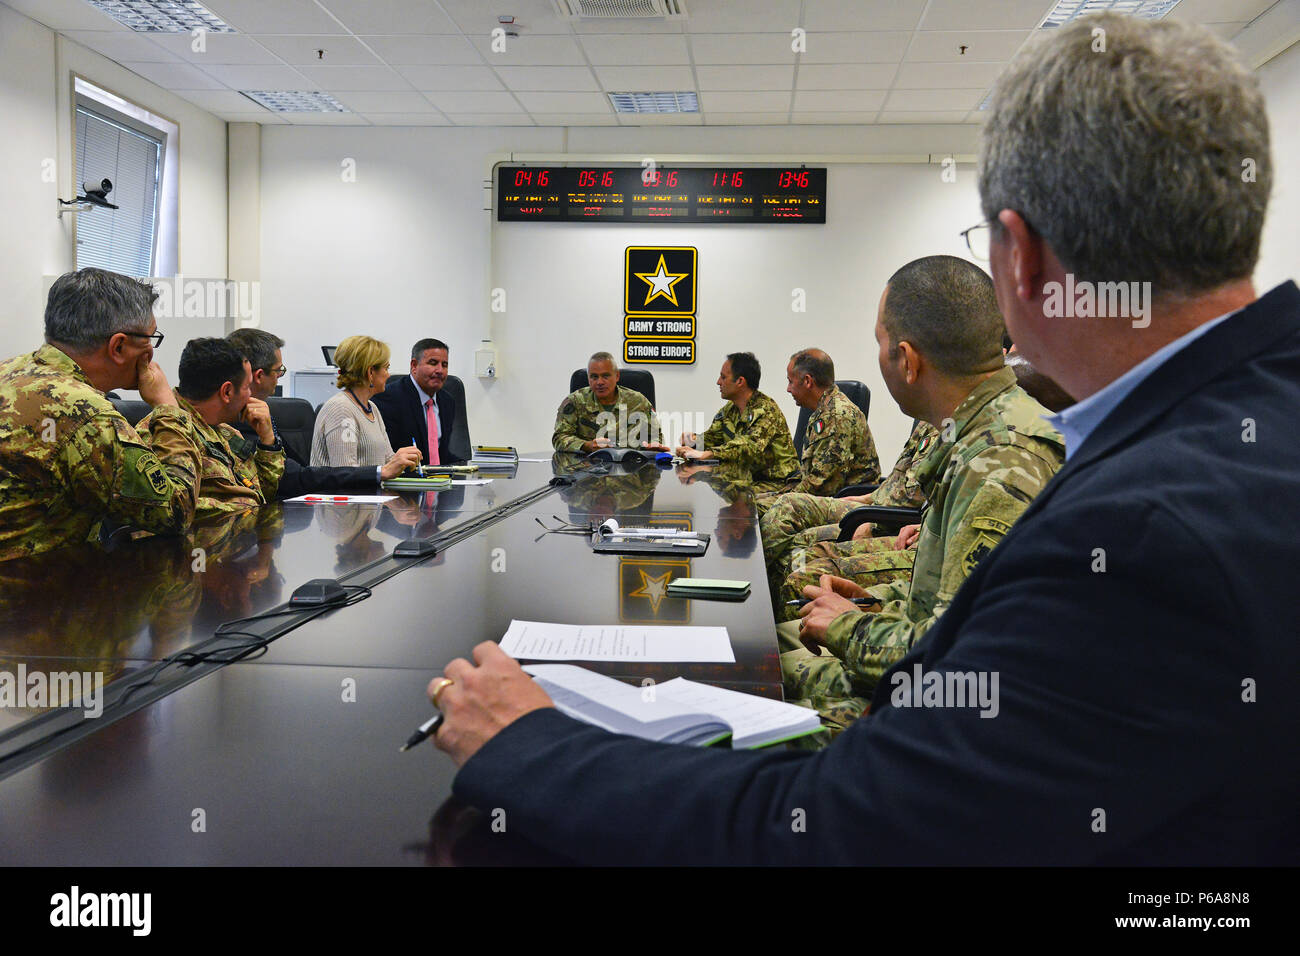 At the center Italian Army Colonel Federico Pognant Airassa, Public Information Officer Land forces Operational Command (COMFOTER),speaks during the meeting media strategies in Caserma Ederle, Vicenza, Italy, May 31, 2016 with delegation of the U.S. Army and Italian Army staff. Italian Army visit U.S. Army,in order to enhance to bilateral relations and to expand levels of cooperation and the capacity of the personnel involved in joint operations. (Photo by Visual Information Specialist Paolo Bovo/Released) Stock Photo